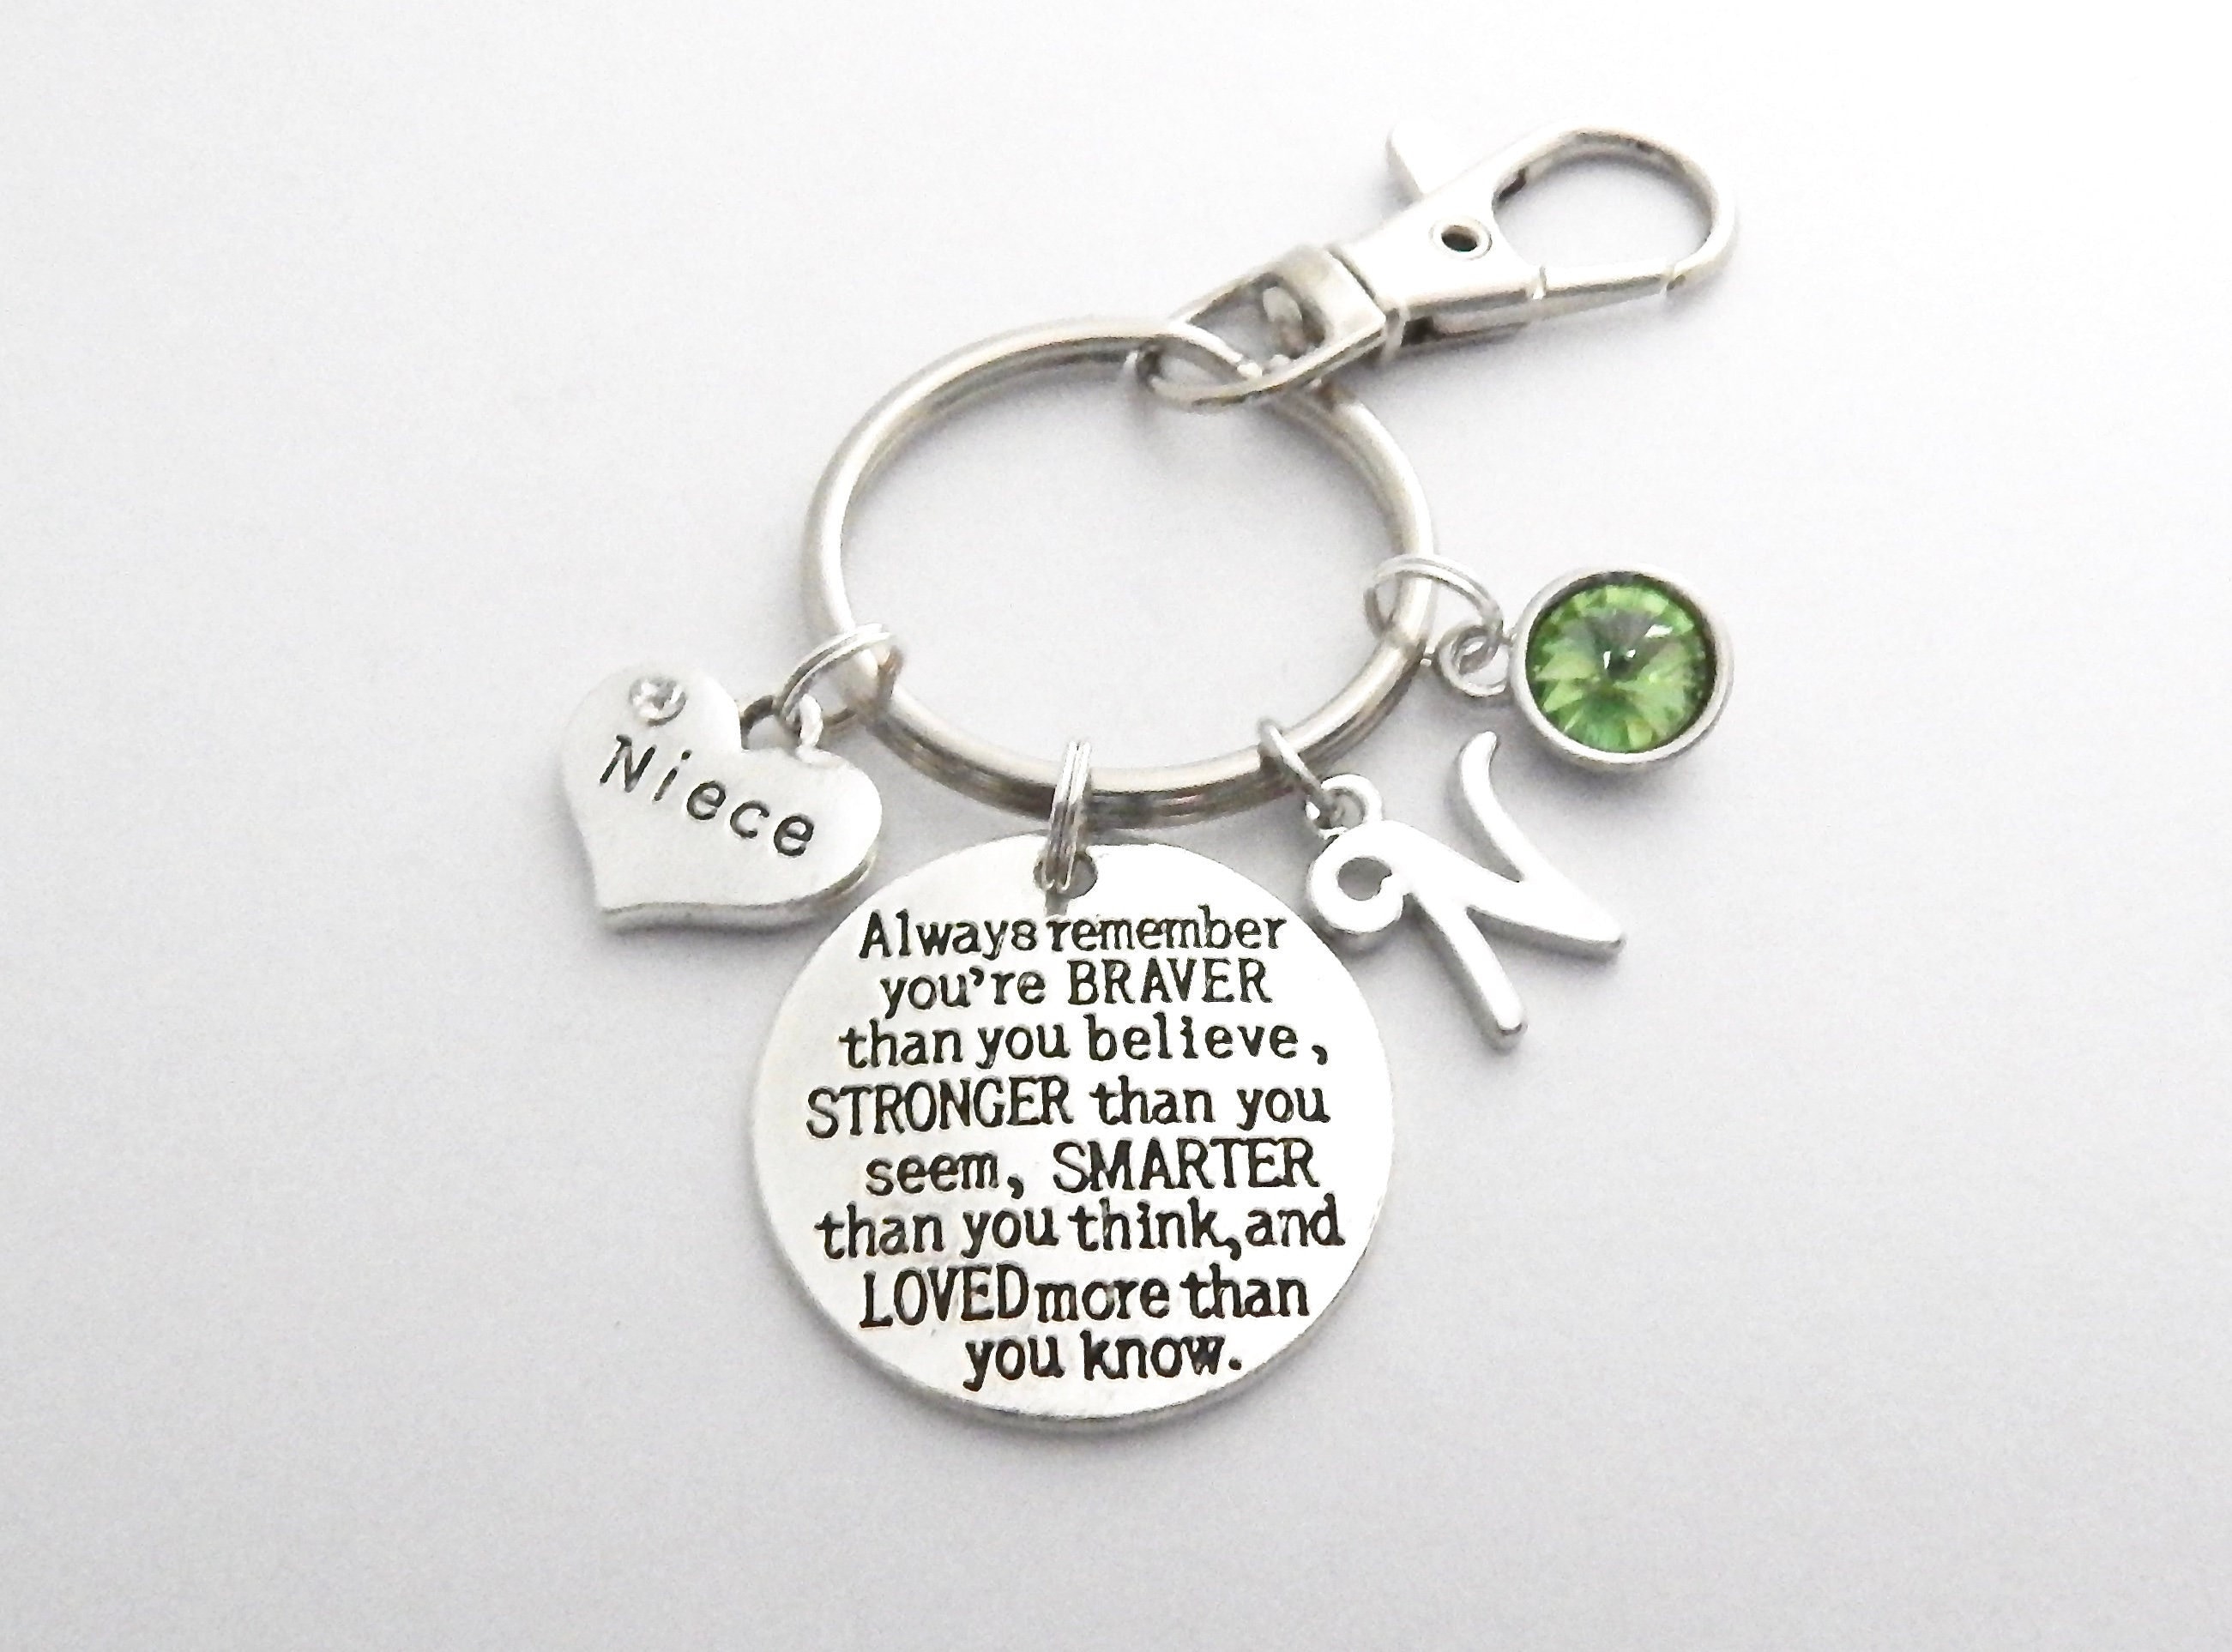 Inspirational Gift Niece Nephew Keychain Always Remember You Are Braver Than You Believe Encouragement Gifts from Aunt Uncle Nephew Aunt